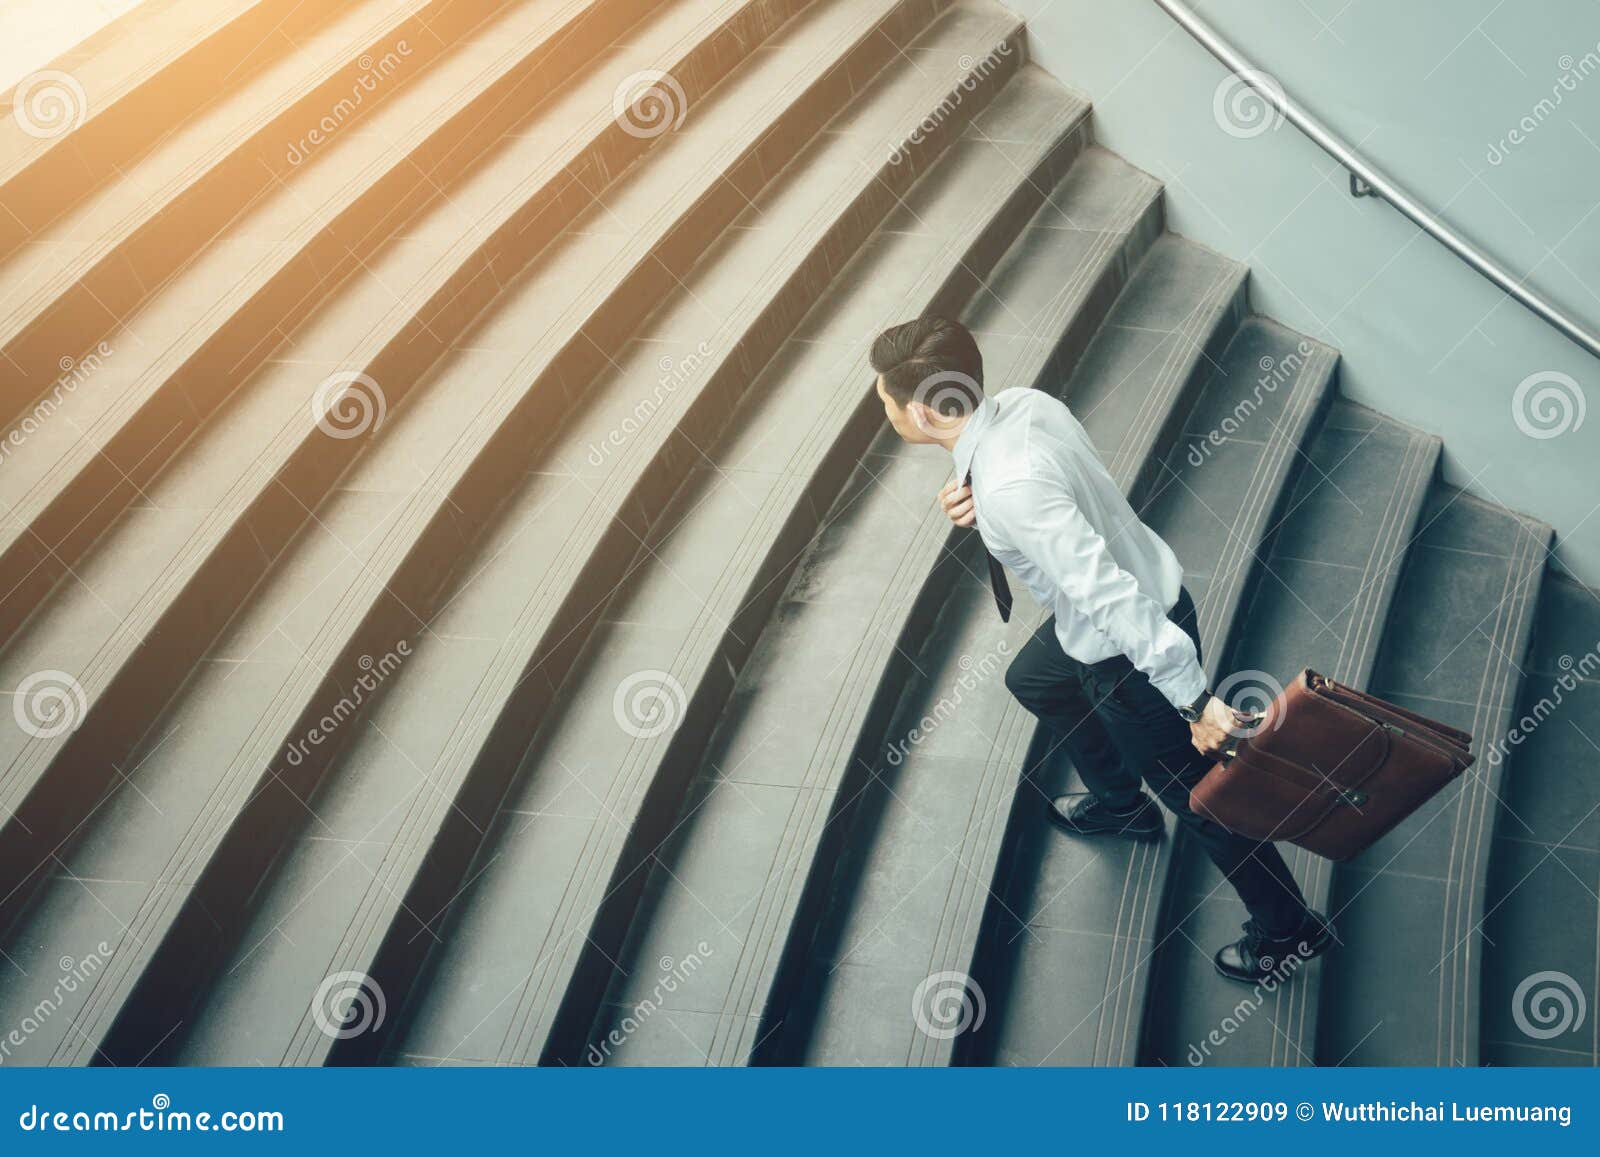 Businessman Holding Suitcase and Running on Stairs. Stock Image - Image